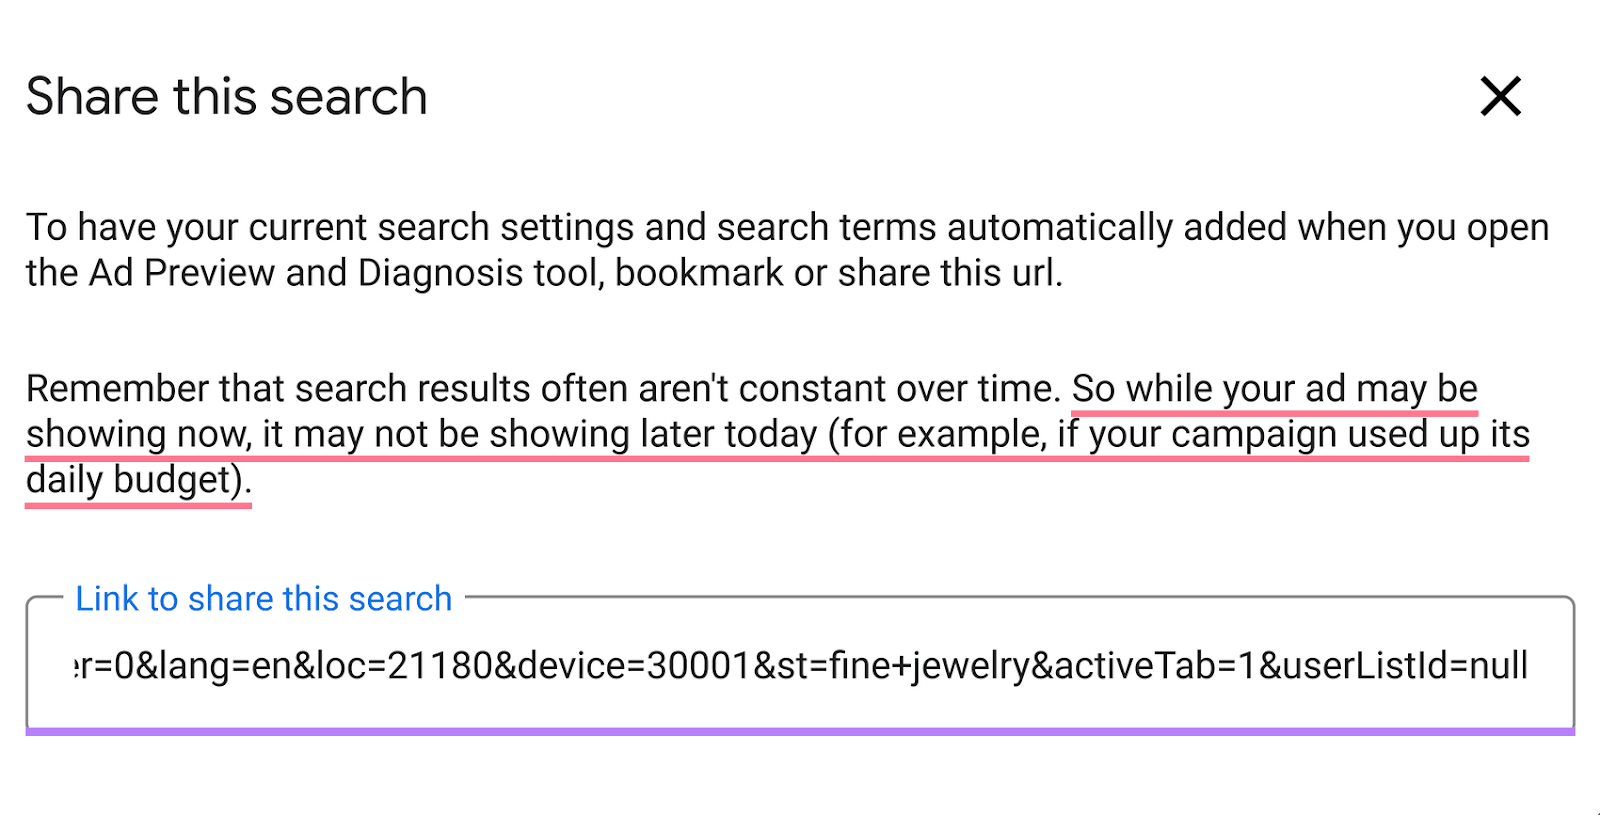 "Ad Preview..." tool dialog box explaining search settings and terms, with a link provided below for sharing purposes.